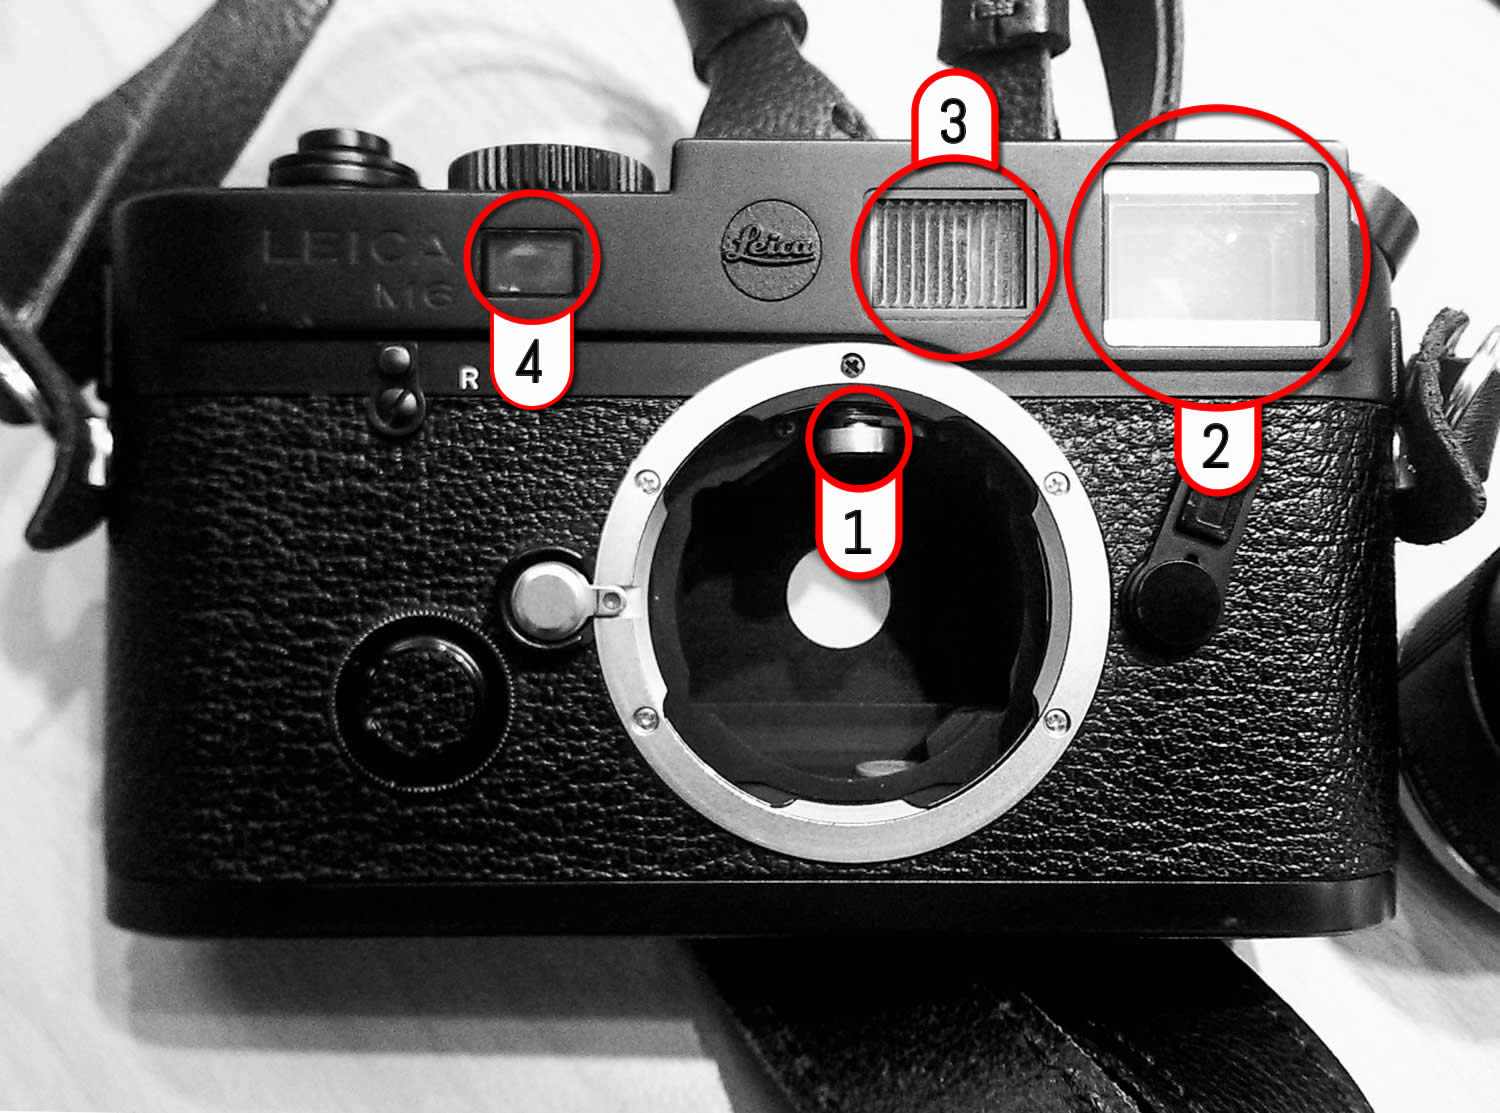 Leica rangefinder annotated components. Image credit: EMULSIVE